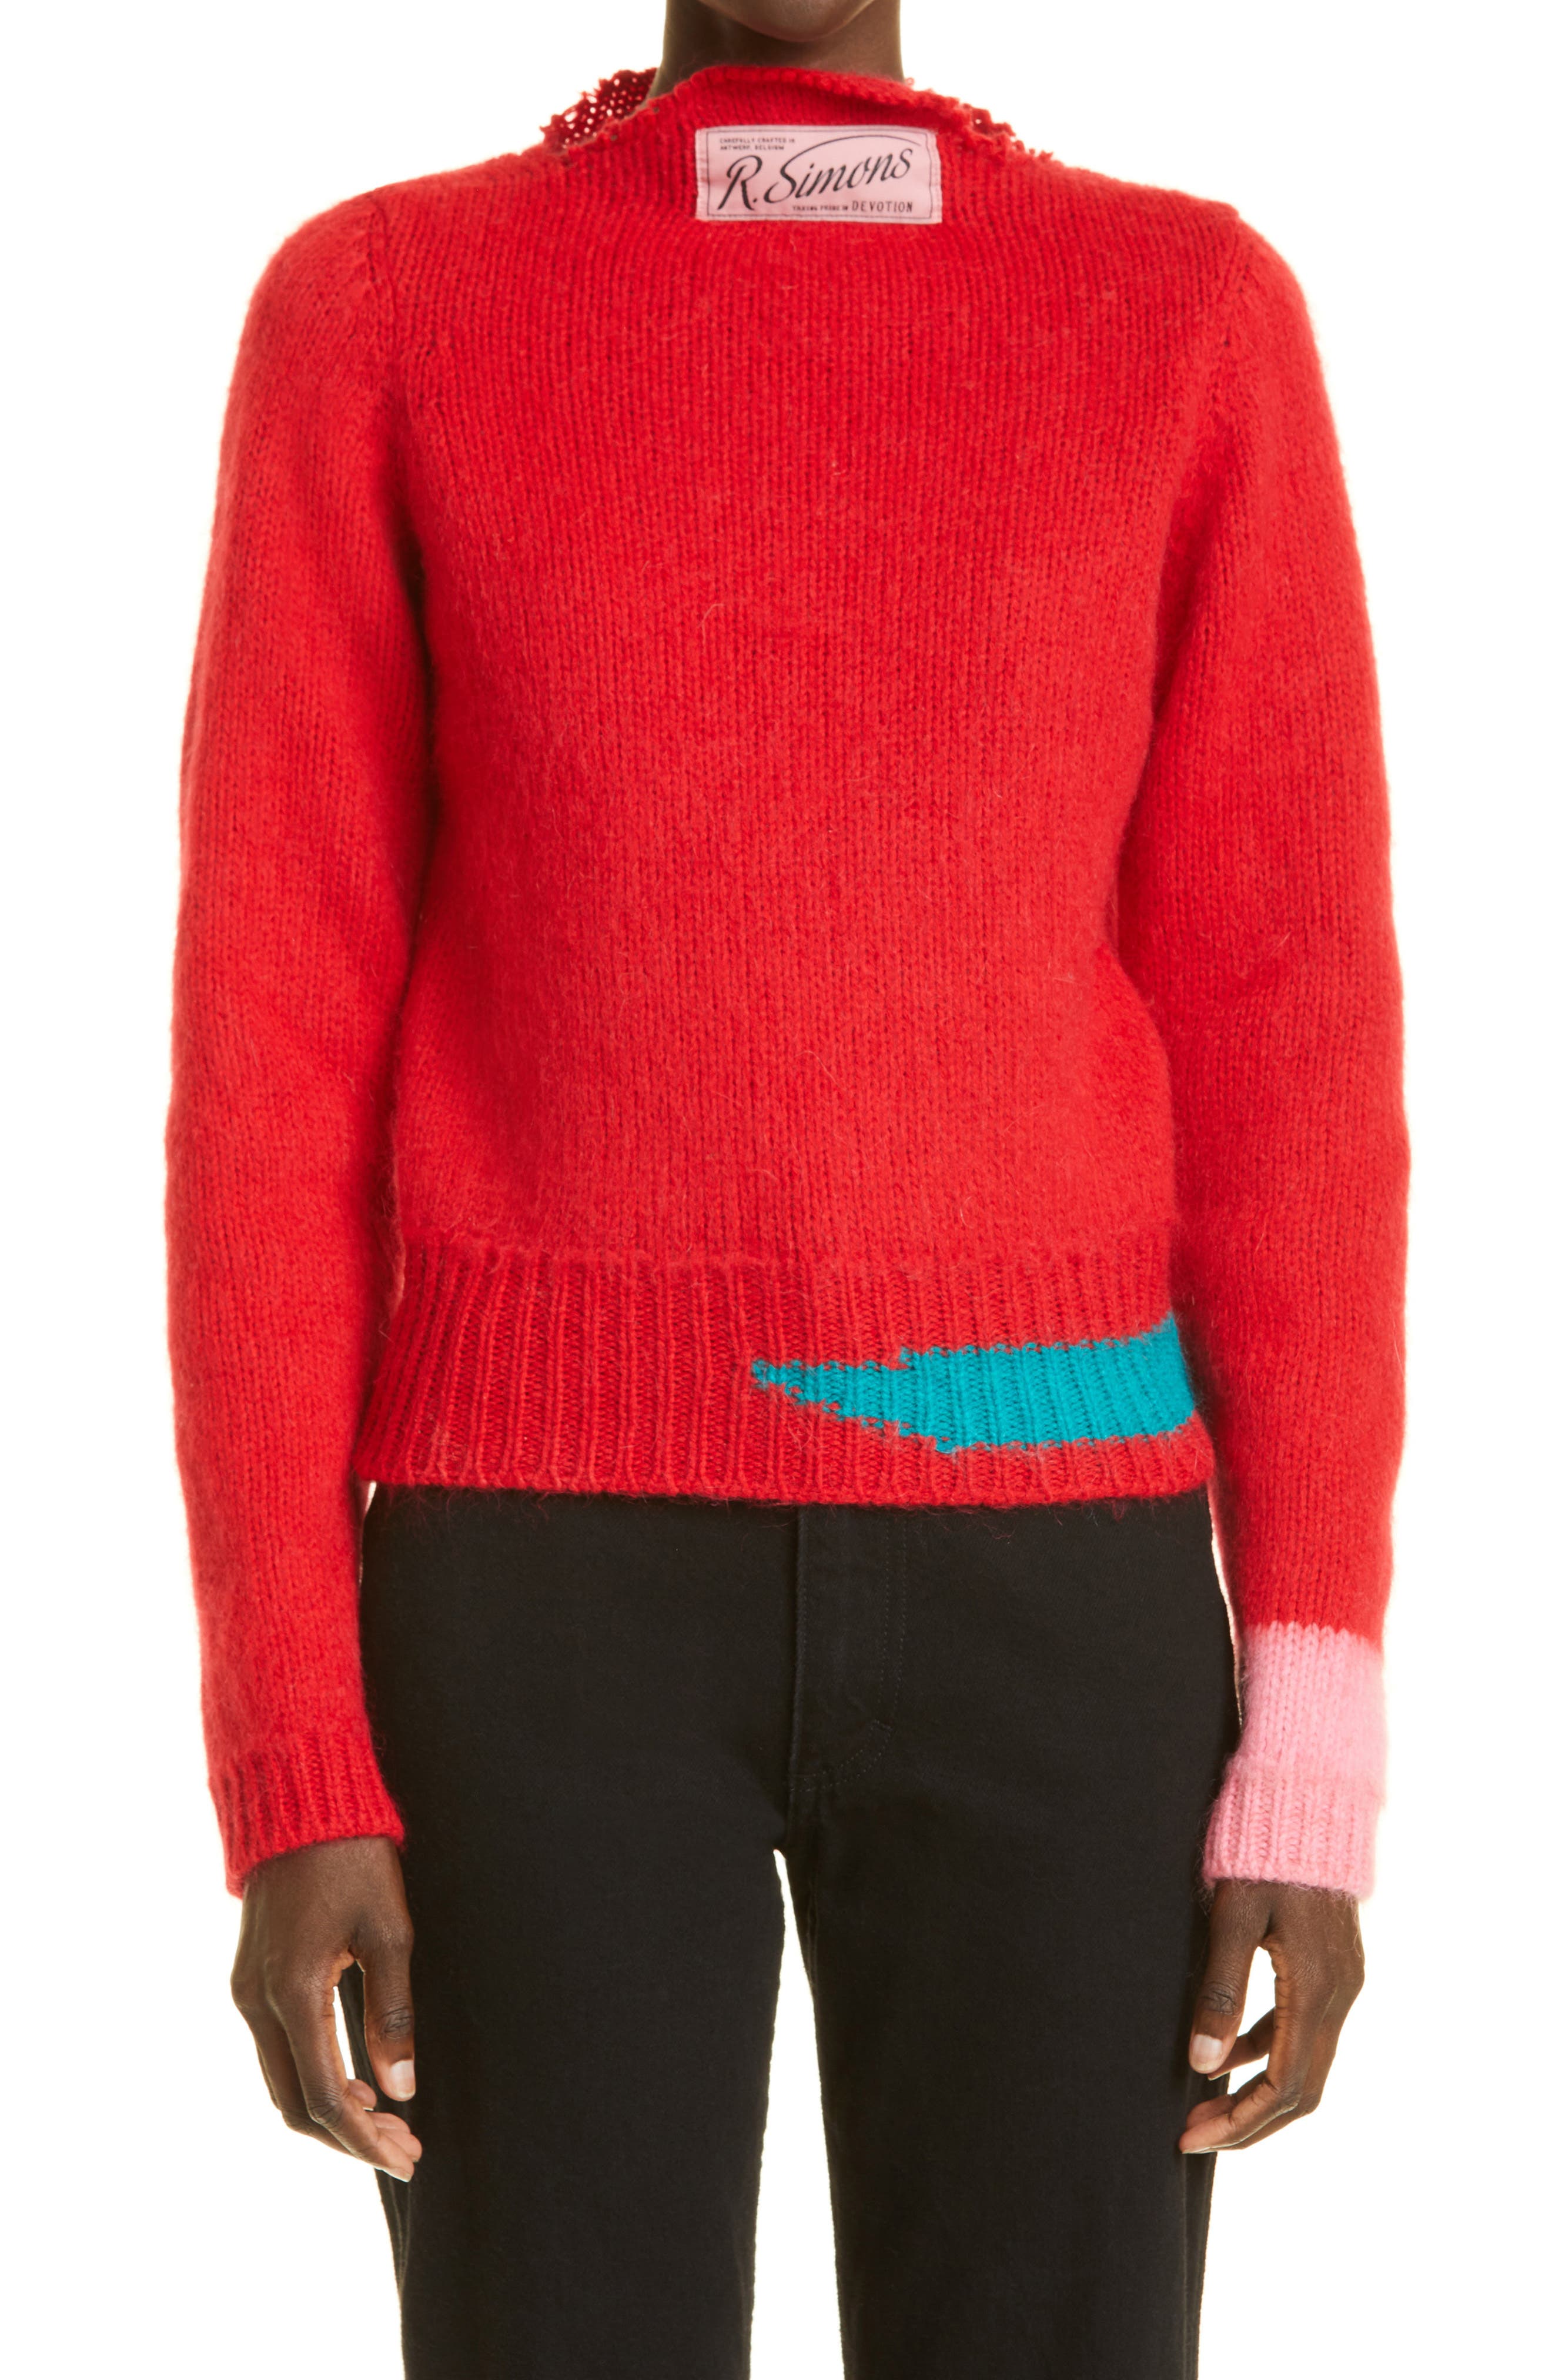 Raf Simons Contrast Accent Virgin Wool Sweater in Red at Nordstrom, Size Small